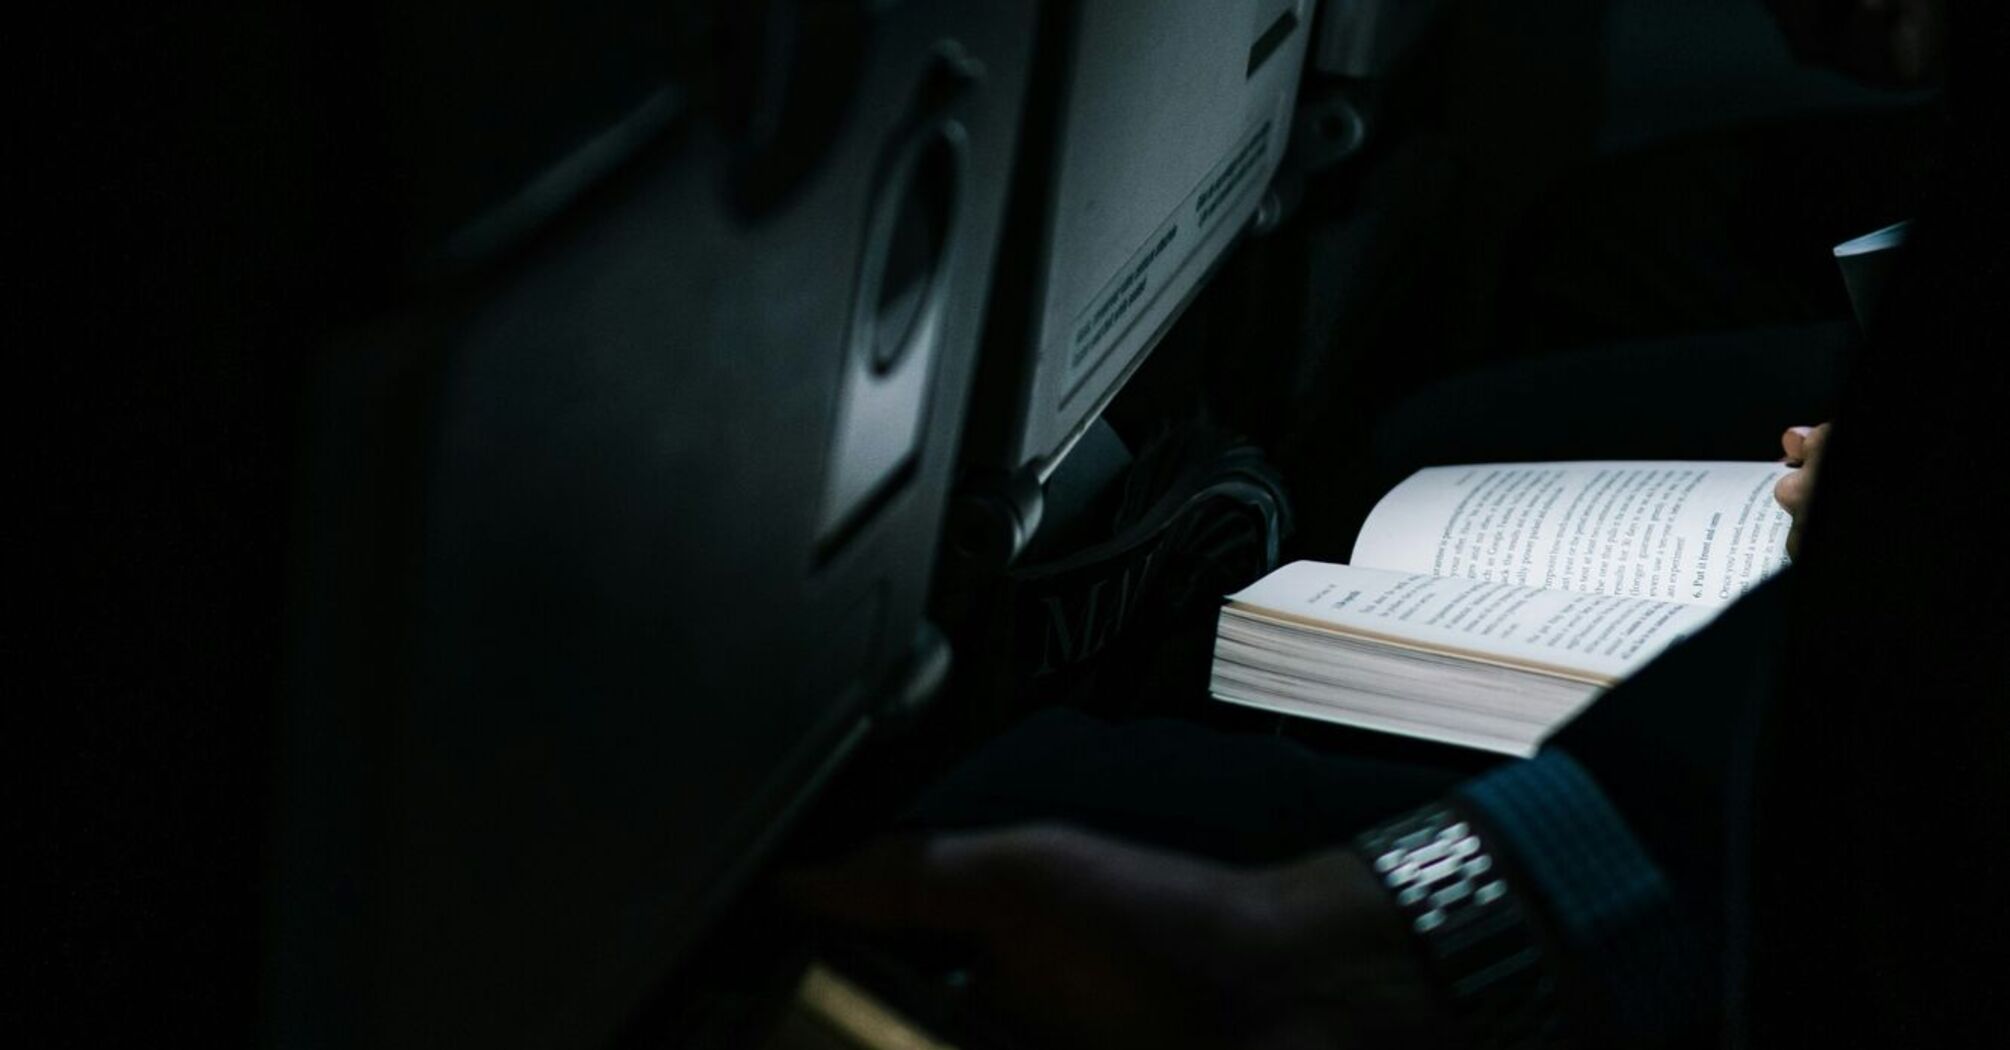 Productive flight: an expert advised on how to make the most of your time in the air to reduce boredom and learn something new